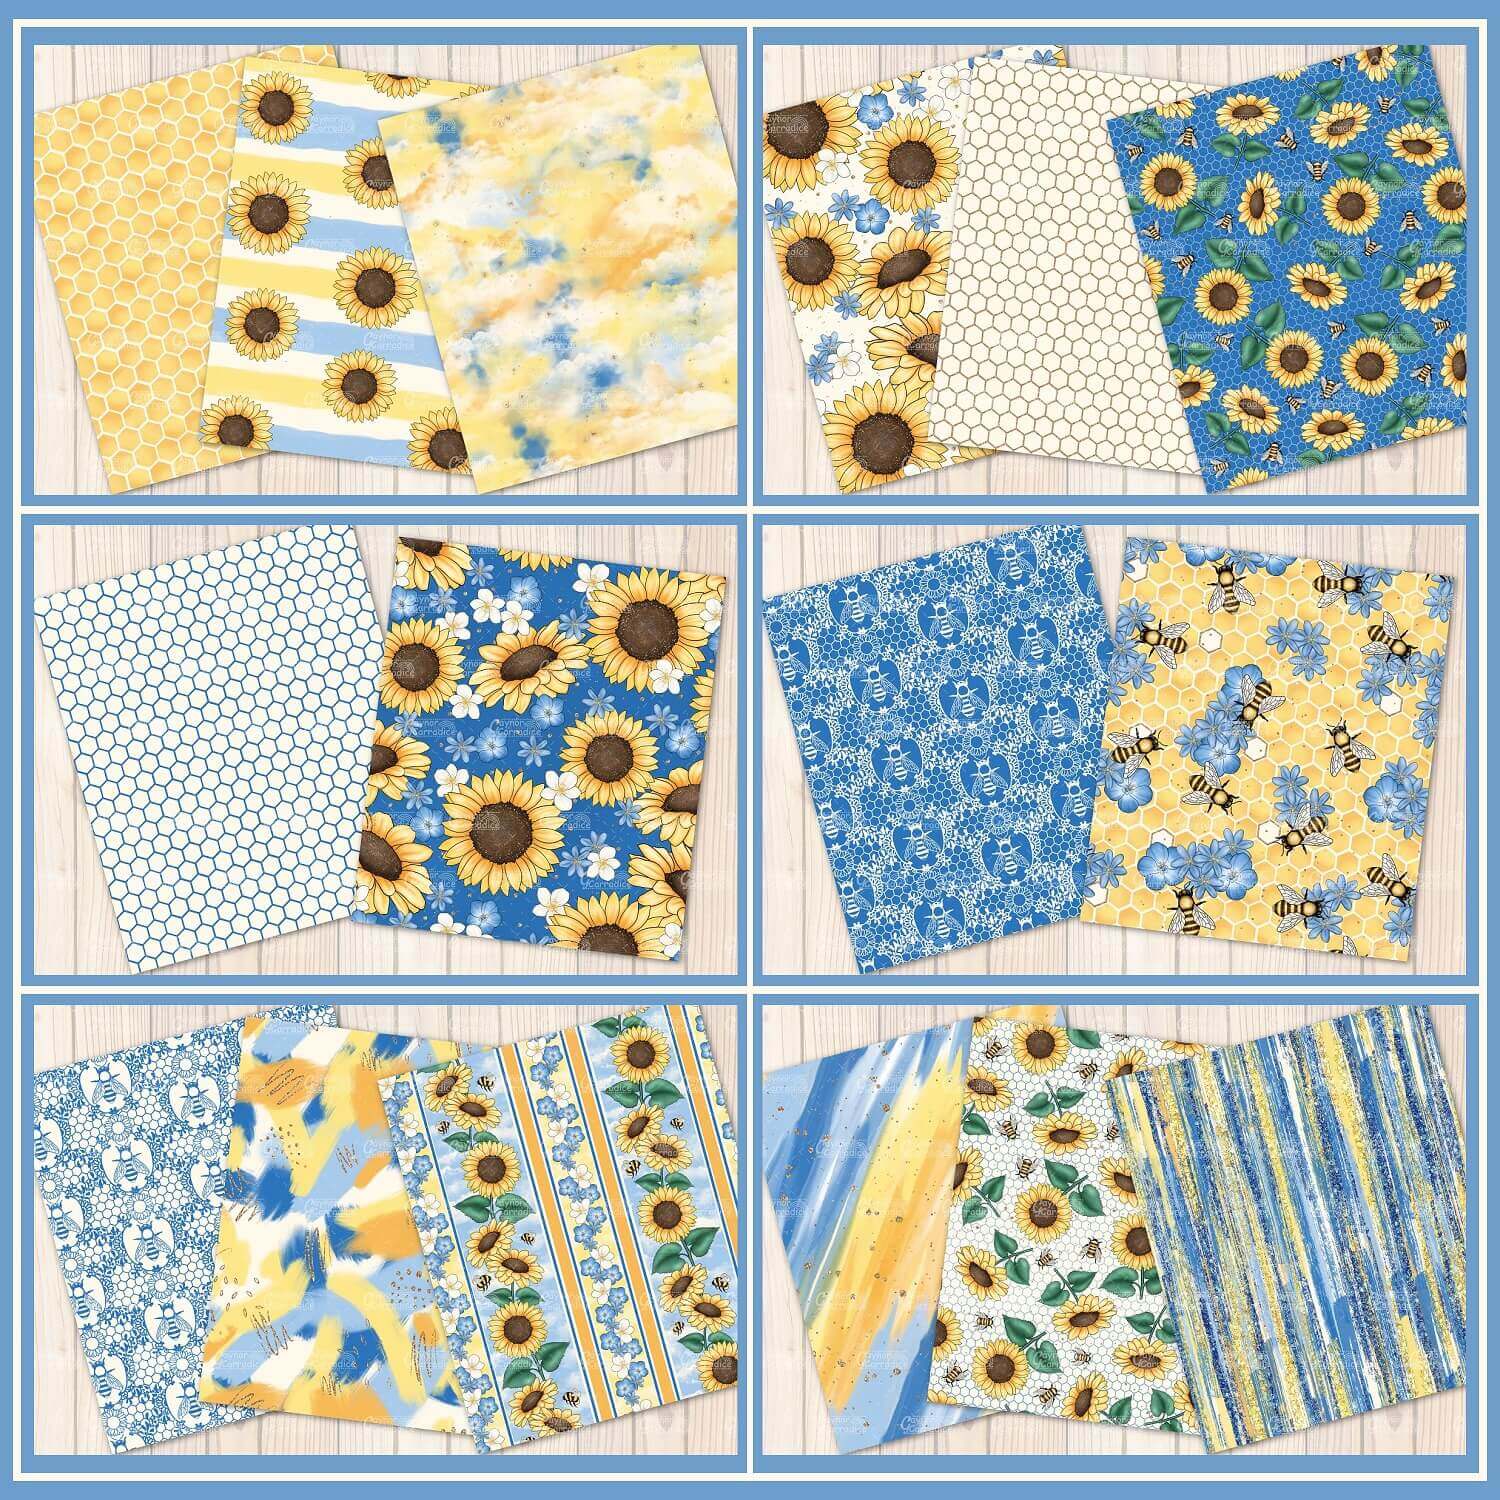 Samples of prints with honeycombs, sunflowers and bees.